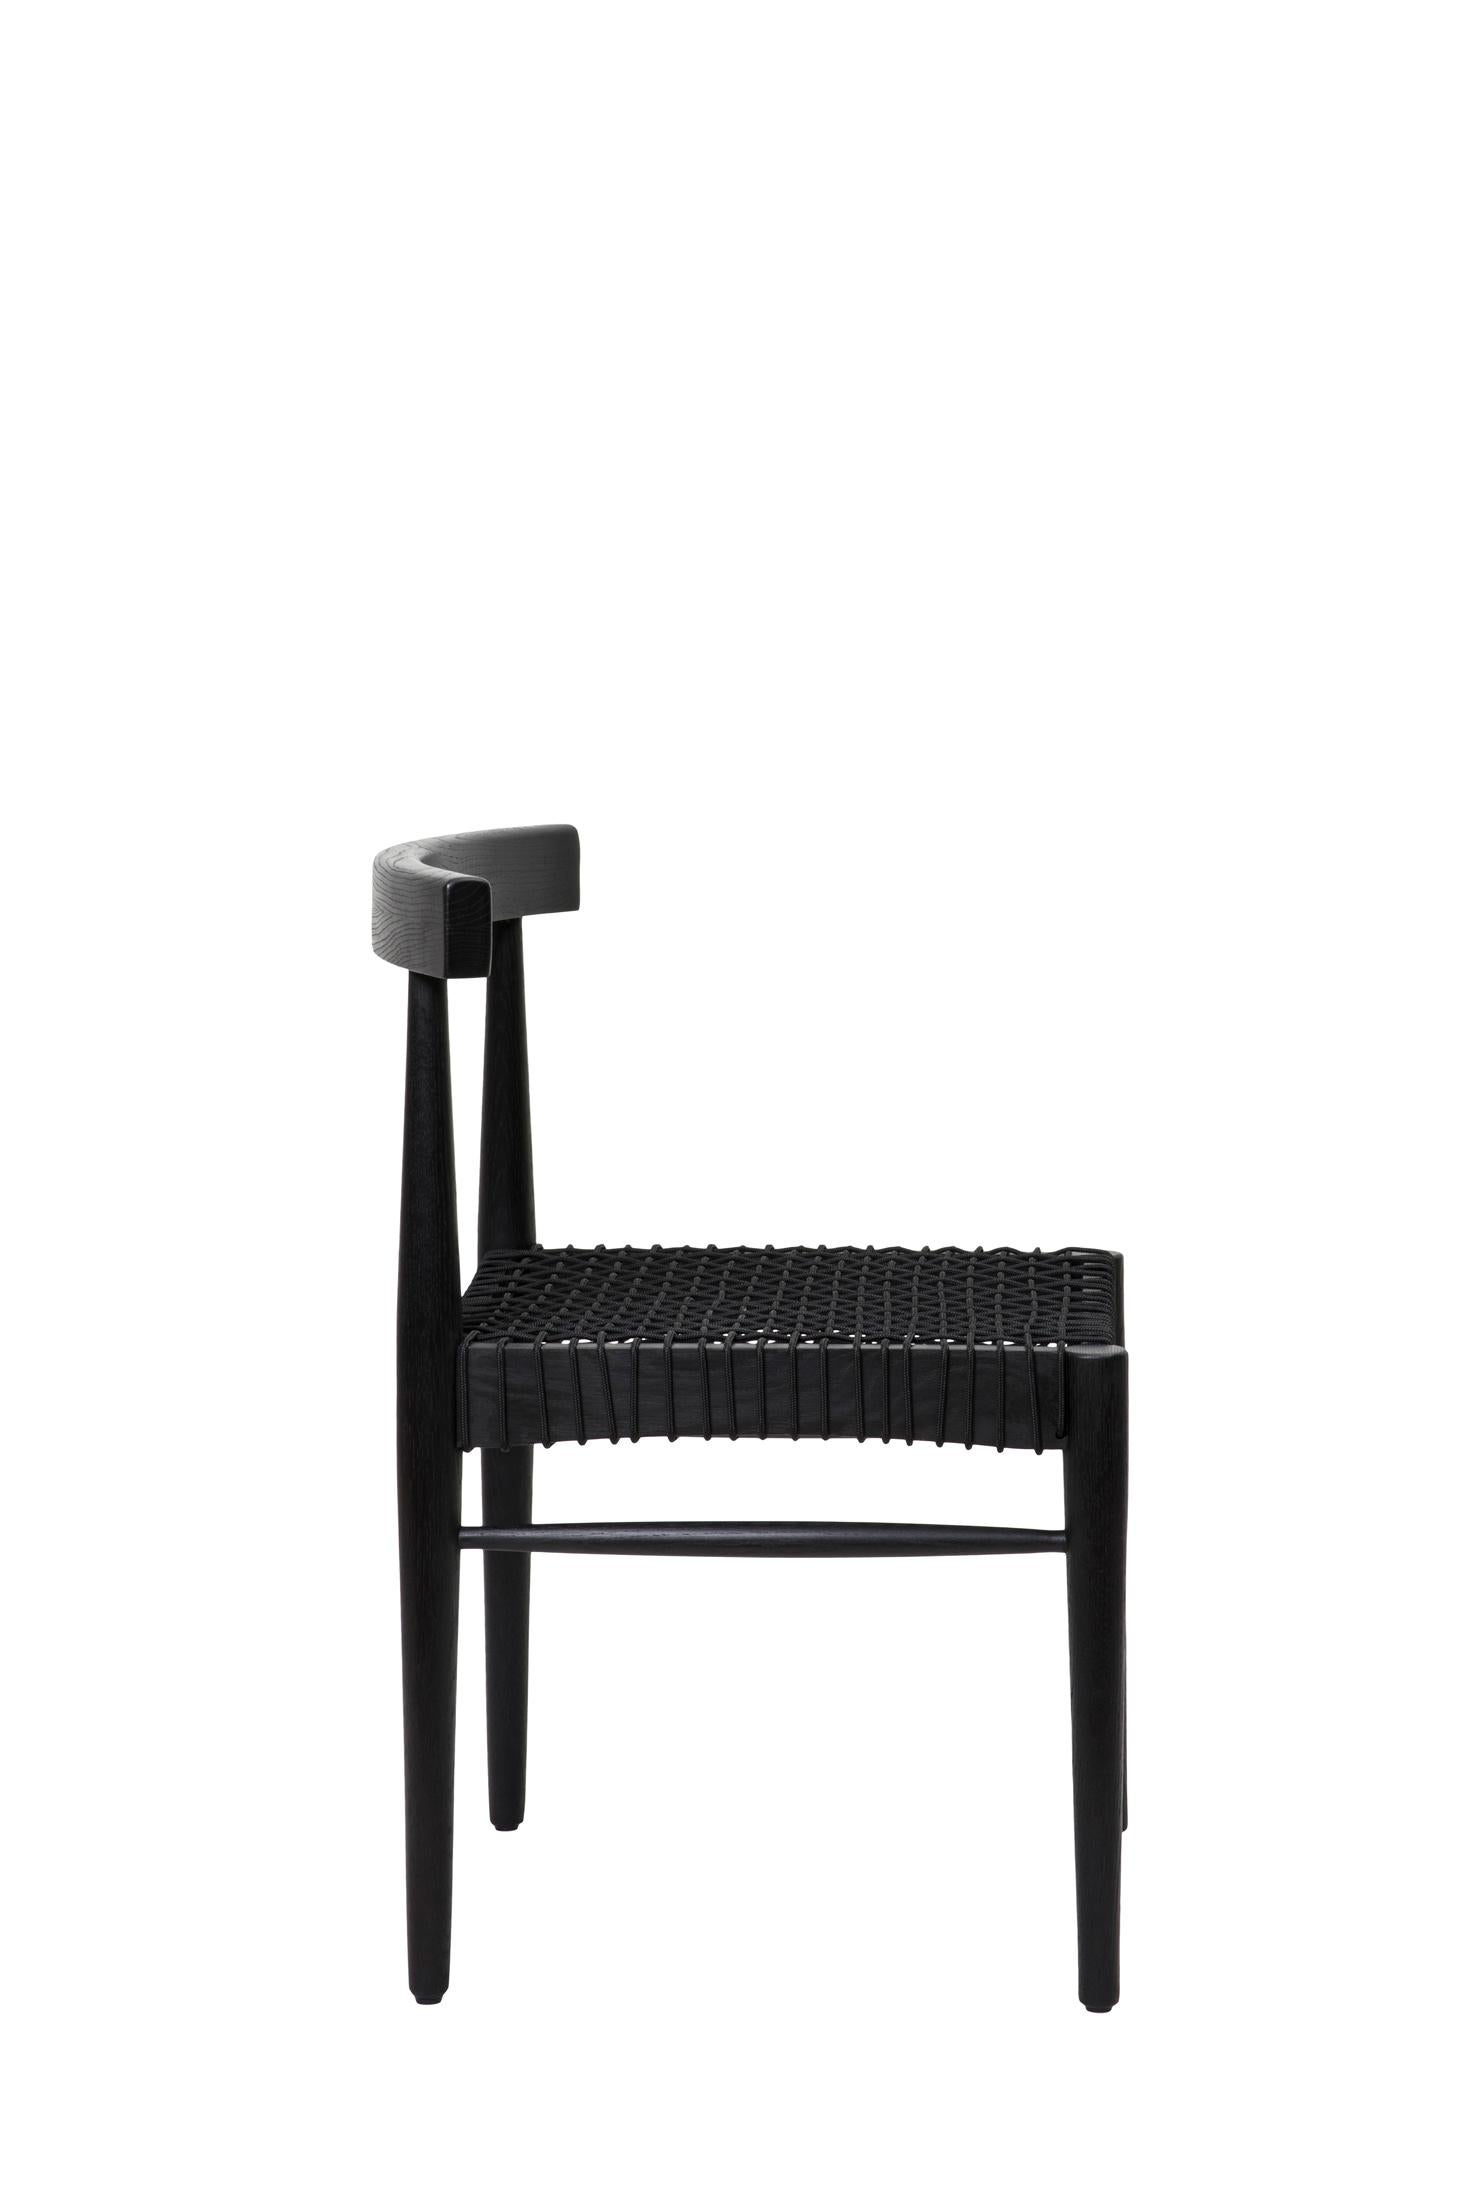 Inspired by early Cape Dutch furniture, the Che Chair is simple, lightweight, and strong. The Che Chair is a relaxed yet refined aesthetic.  This modern take on a traditional South African design, known as Riempie, uses leather strips woven together